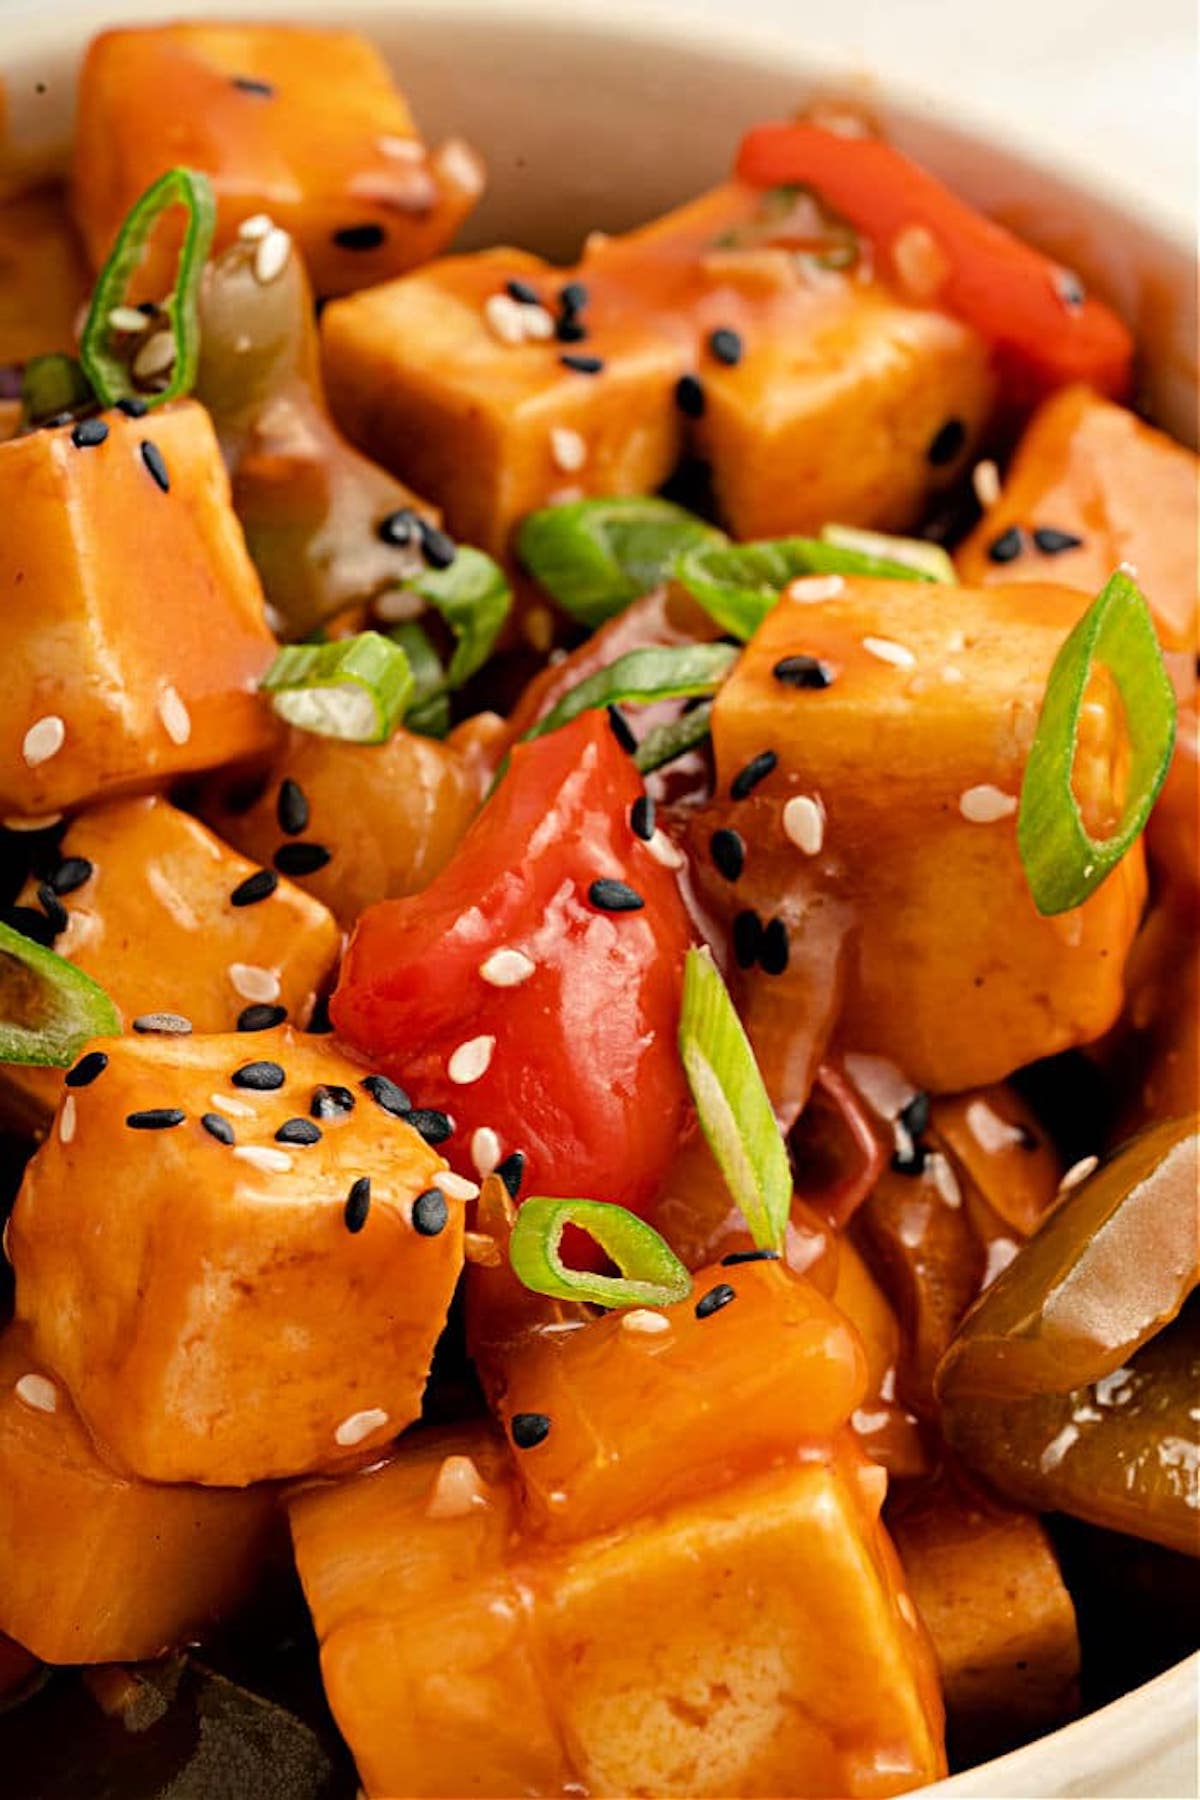 Chopped chicken and vegetables covered in copycat sweet & sour sauce and garnished with sliced green onion and sesame seeds.